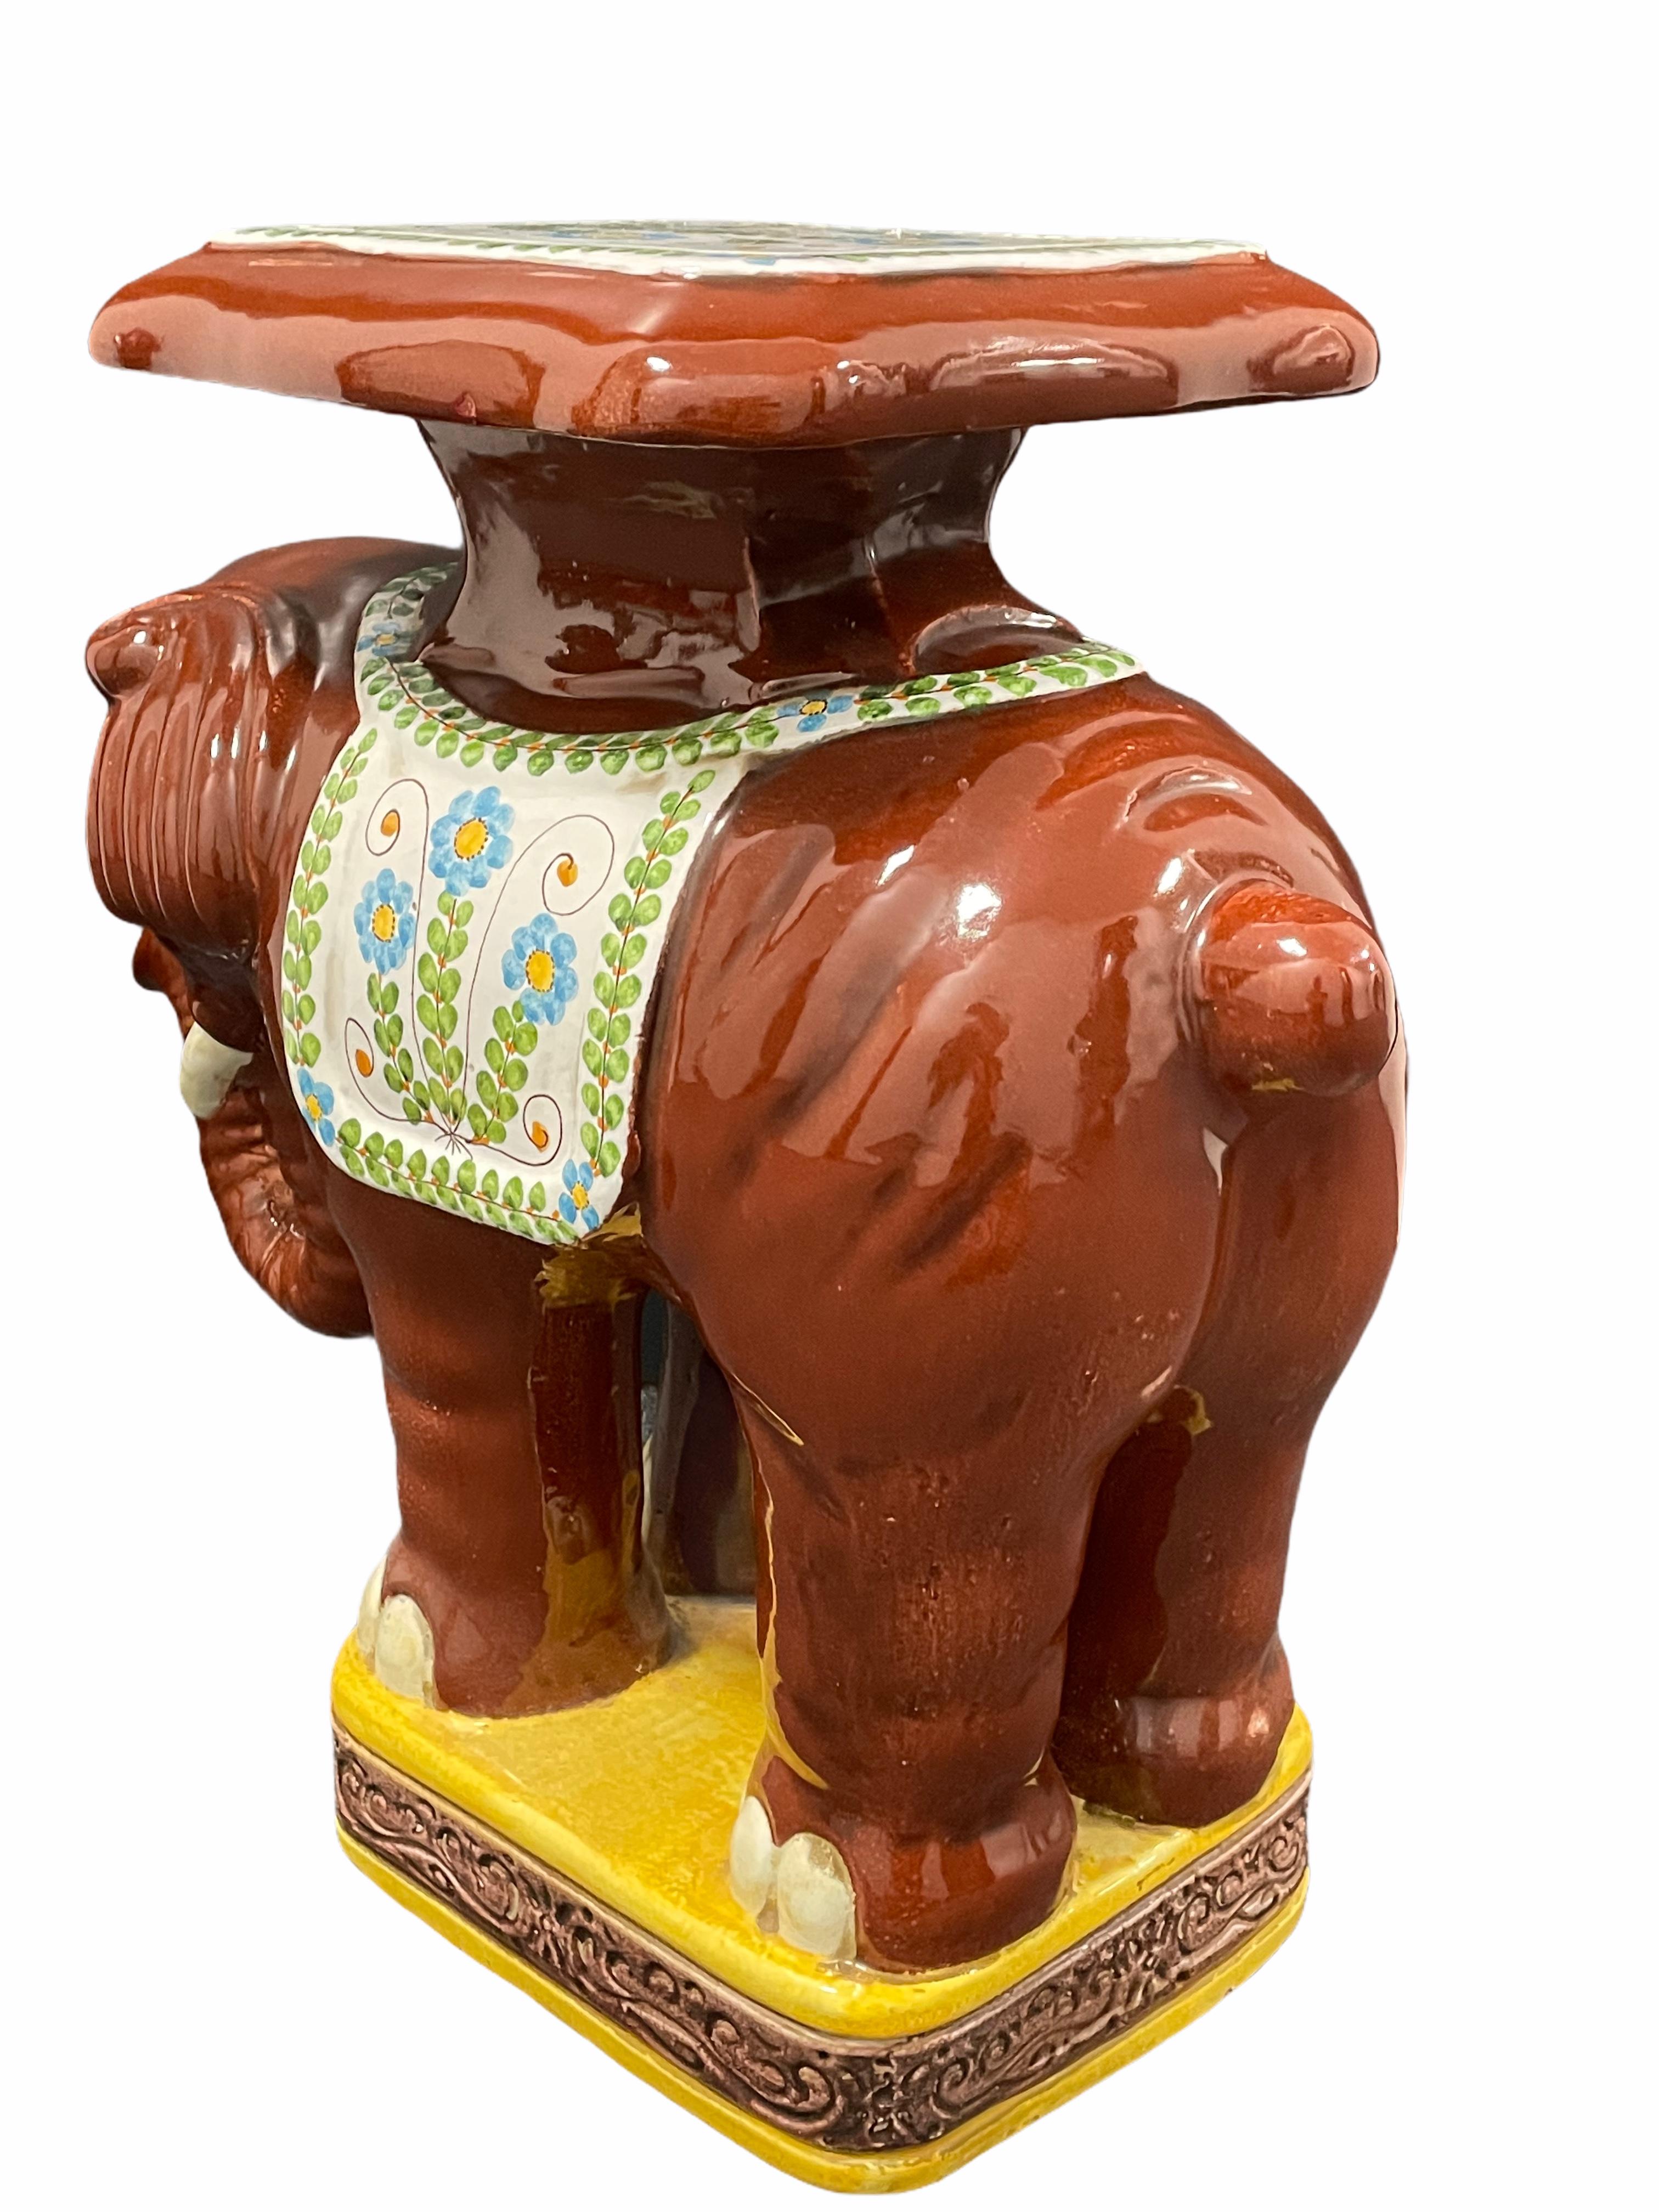 Mid-20th century glazed terracotta garden stool plant stand or seat, flower pot seat or side table. Handmade of terracotta. Vintage garden seat in the shape of an elephant with a pedestal top, all in beautiful color and details. Nice addition to